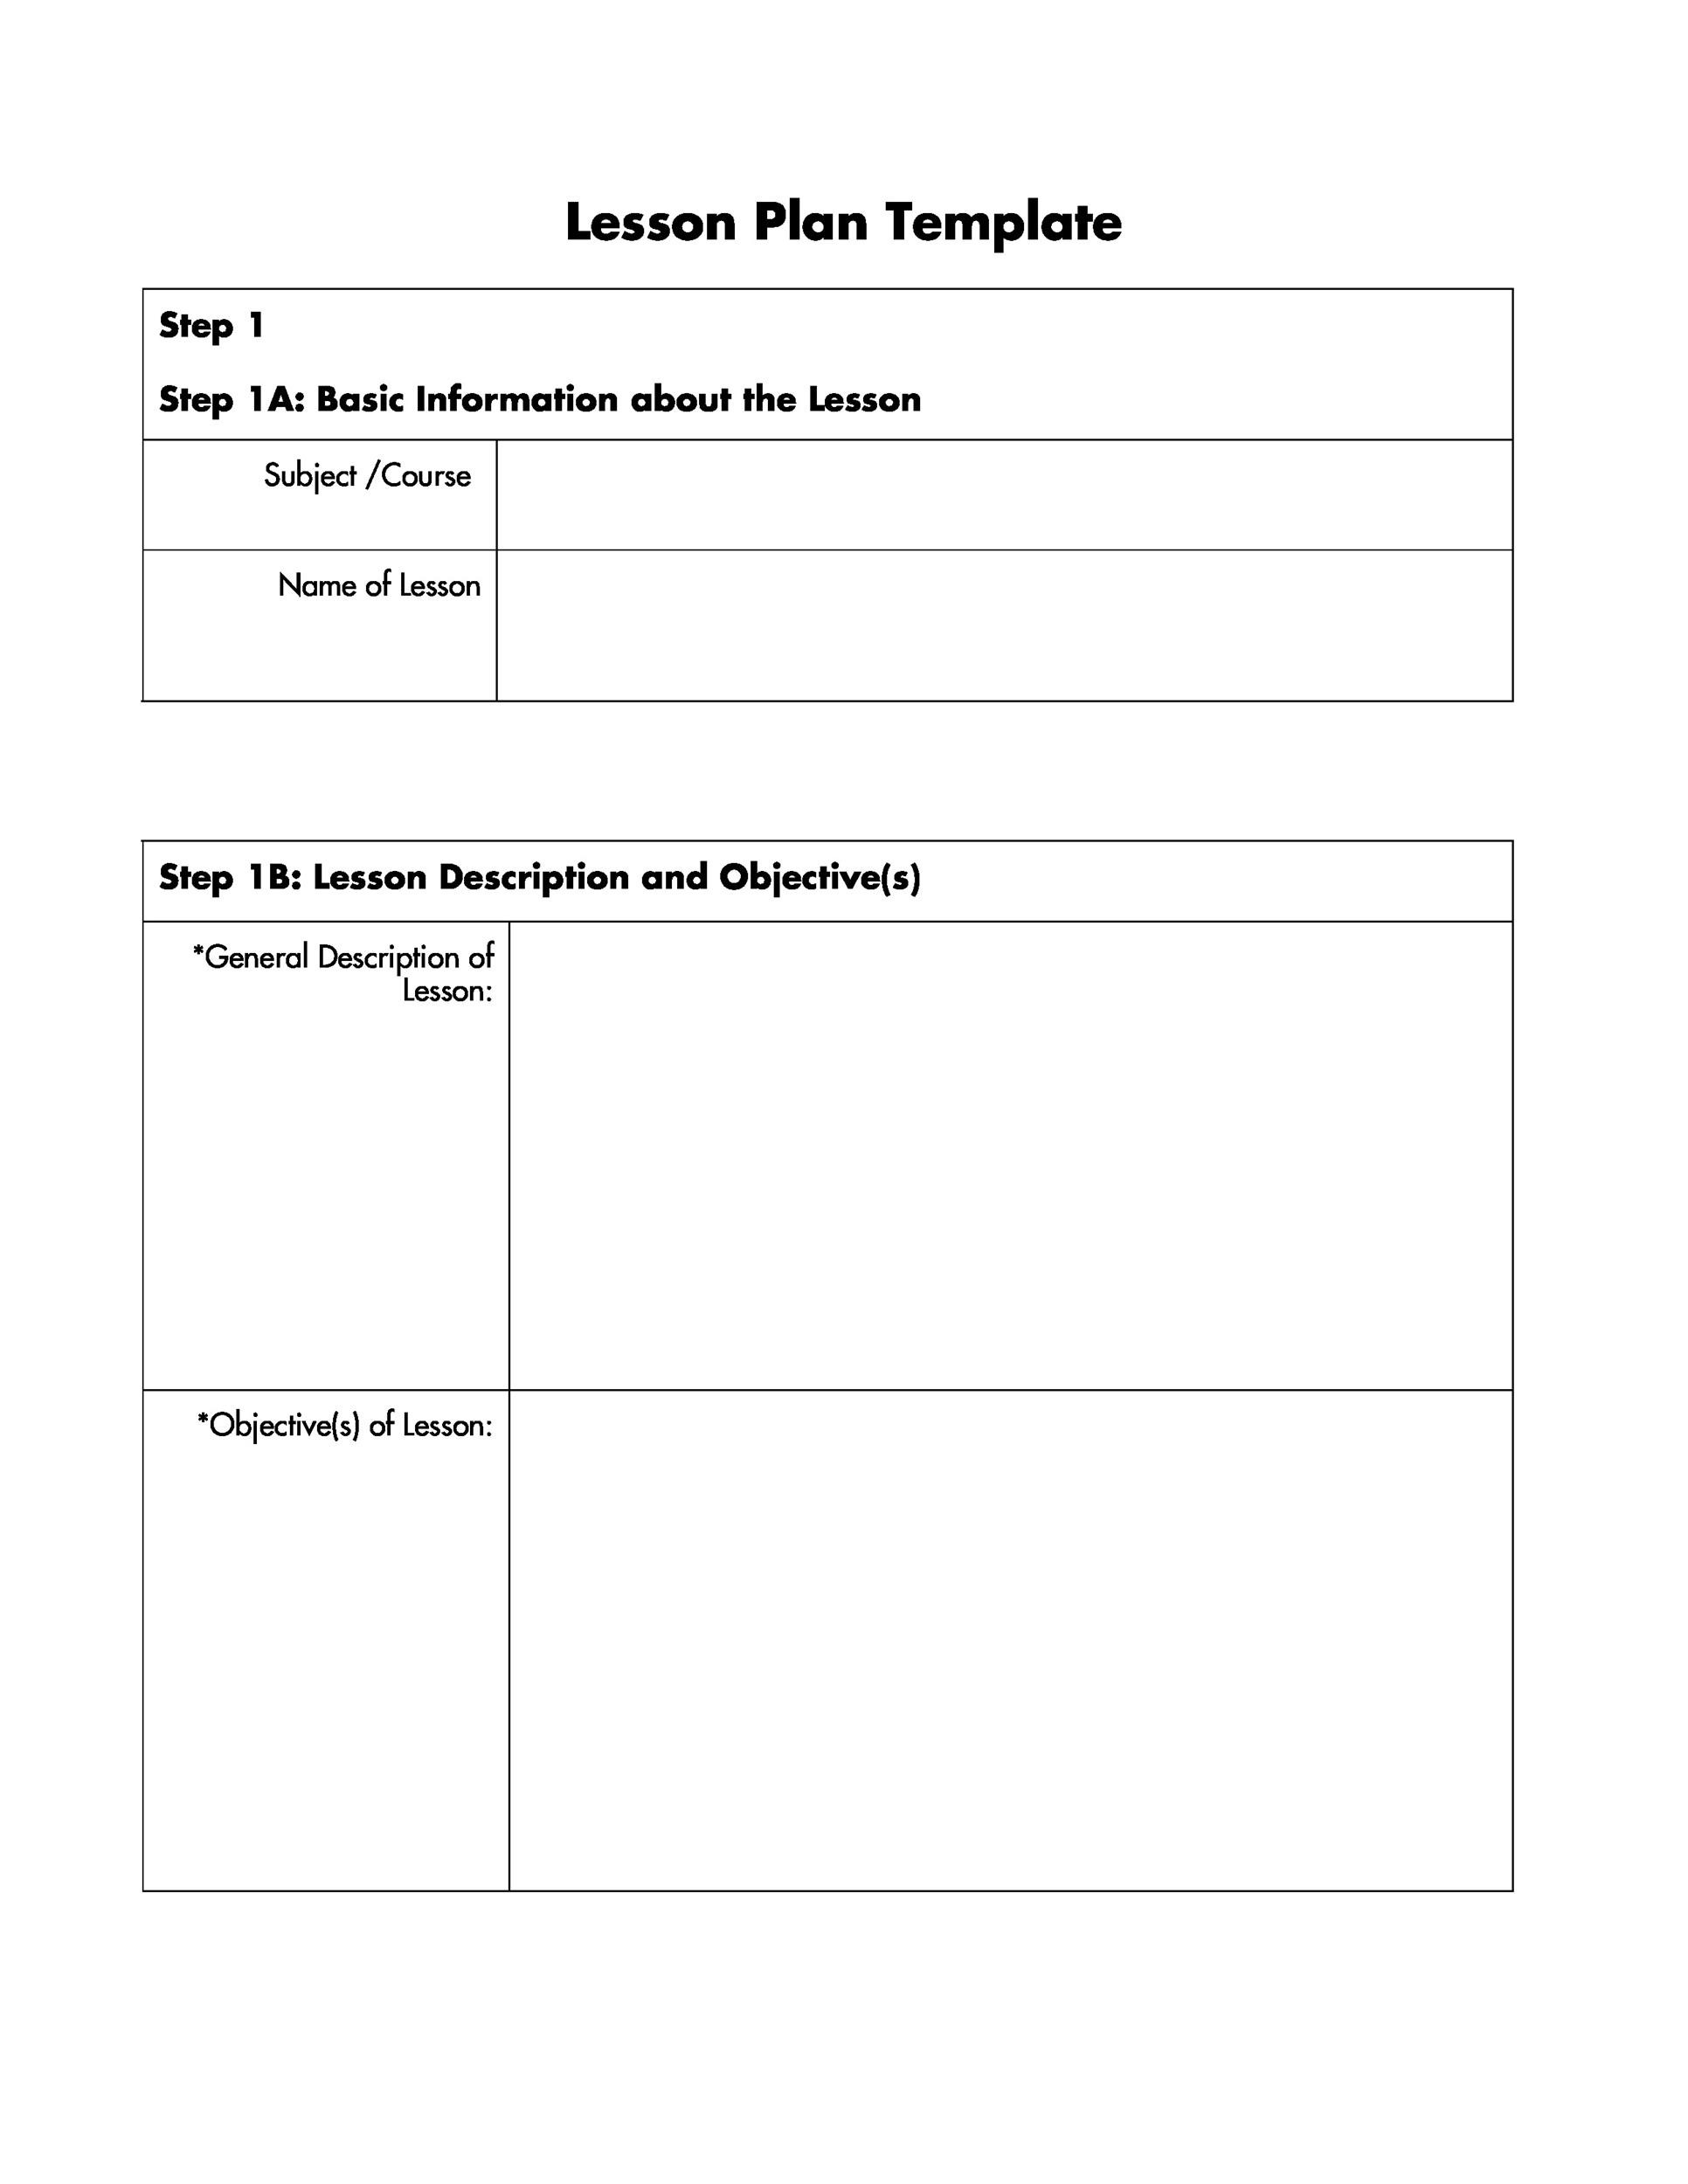 Weekly Lesson Plan Templates 15 Best Lesson Planners Free Download 